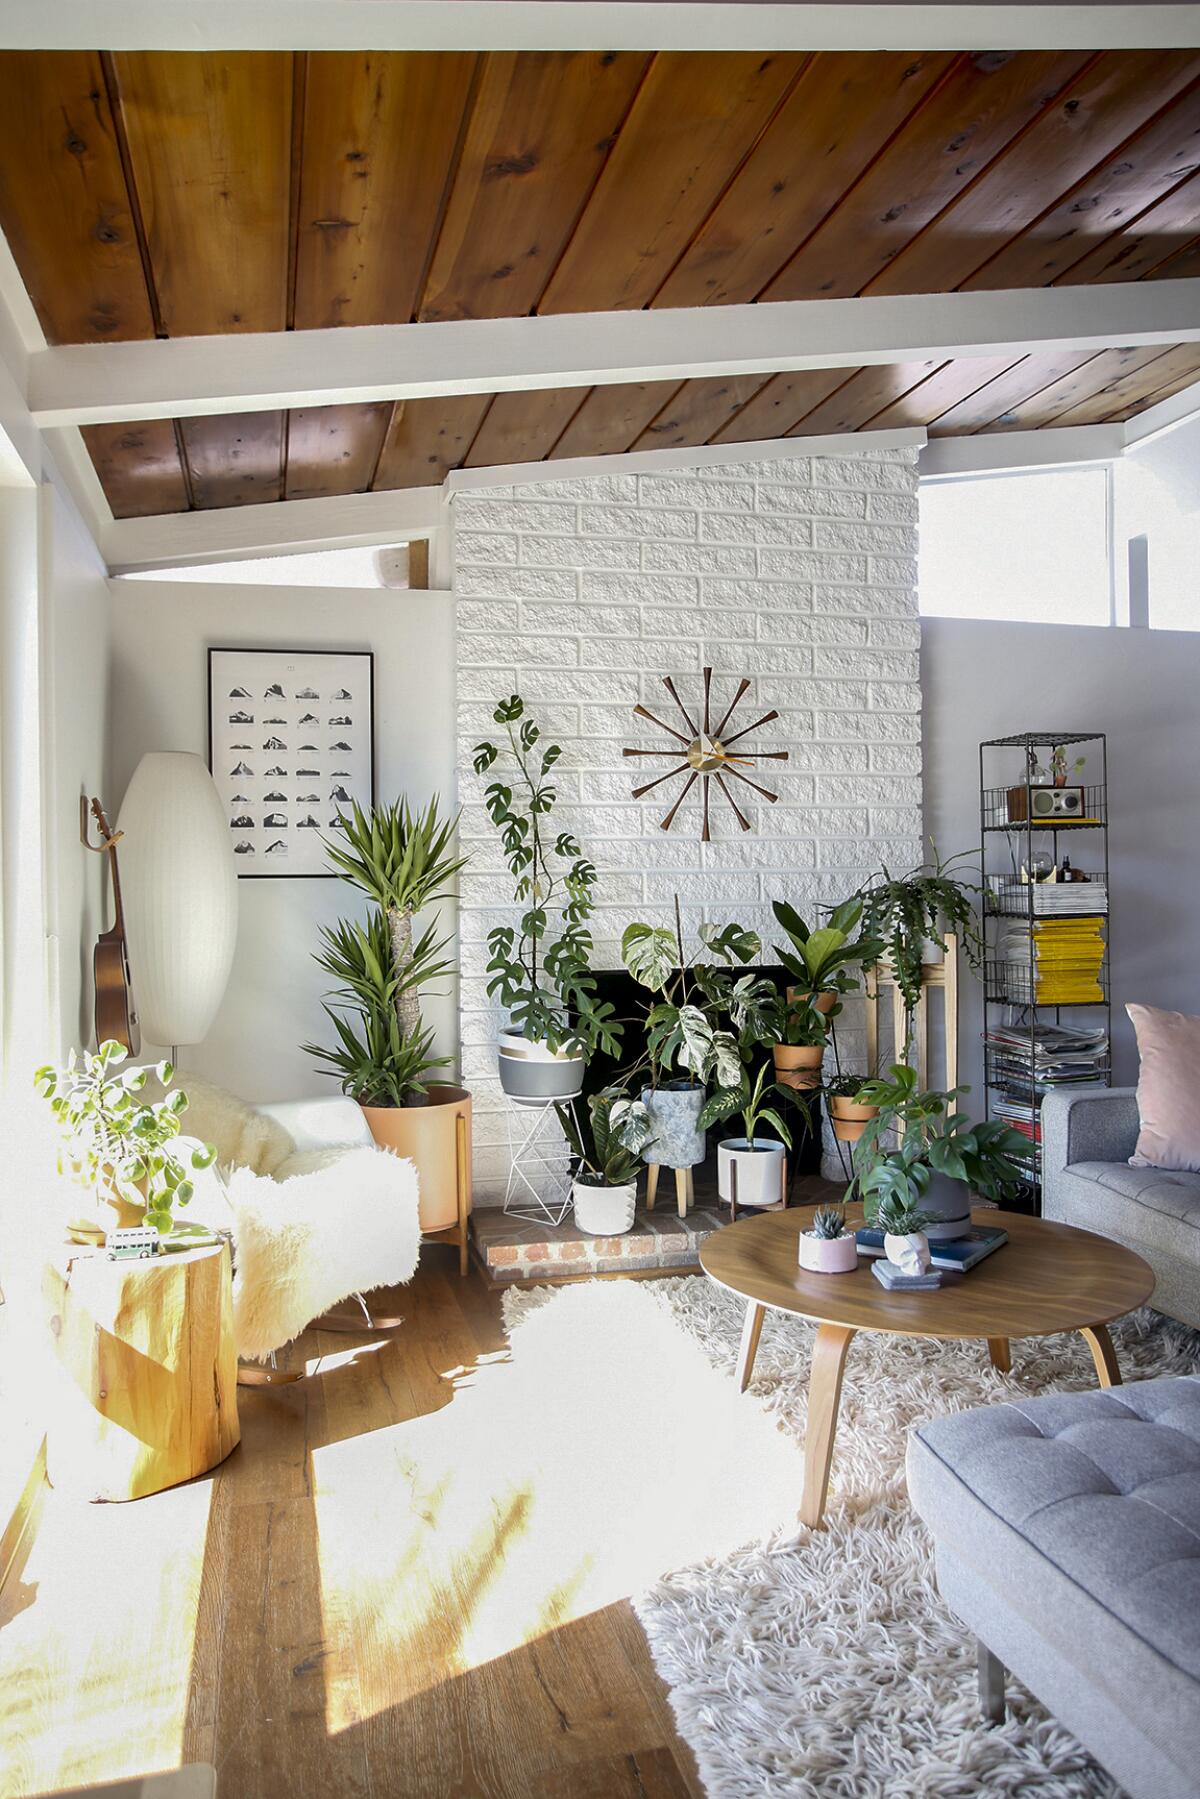 Light shines through a window in a room filled with greenery in "Houseplants for All: How To Fill Any Home With Happy Plants"